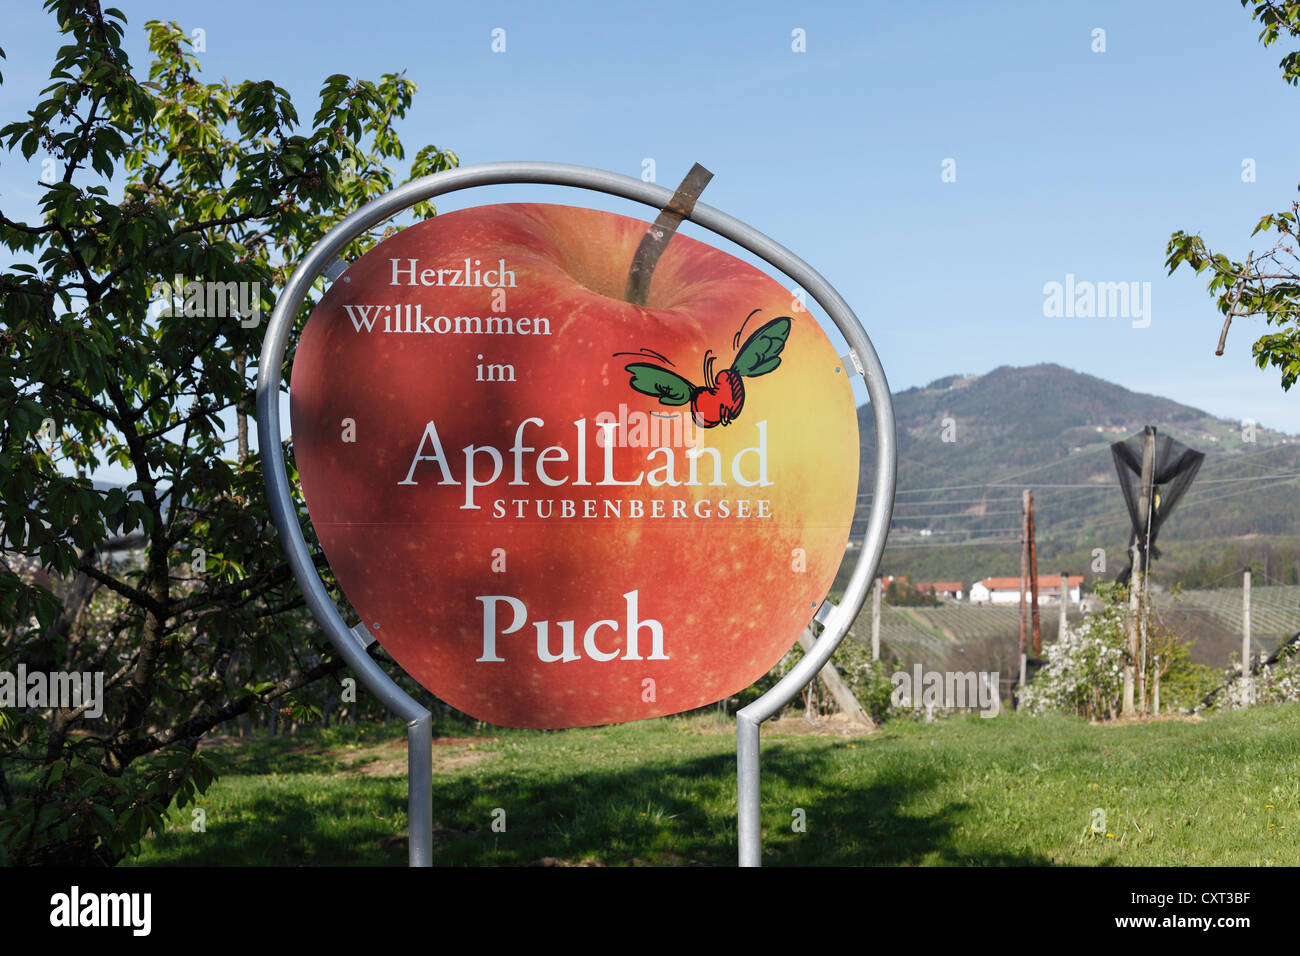 Sign 'Apfelland Stubenbergsee Puch', German for 'apple country Stubenbergsee Puch', Puch near Weiz, East , , Austria, Europe Stock Photo